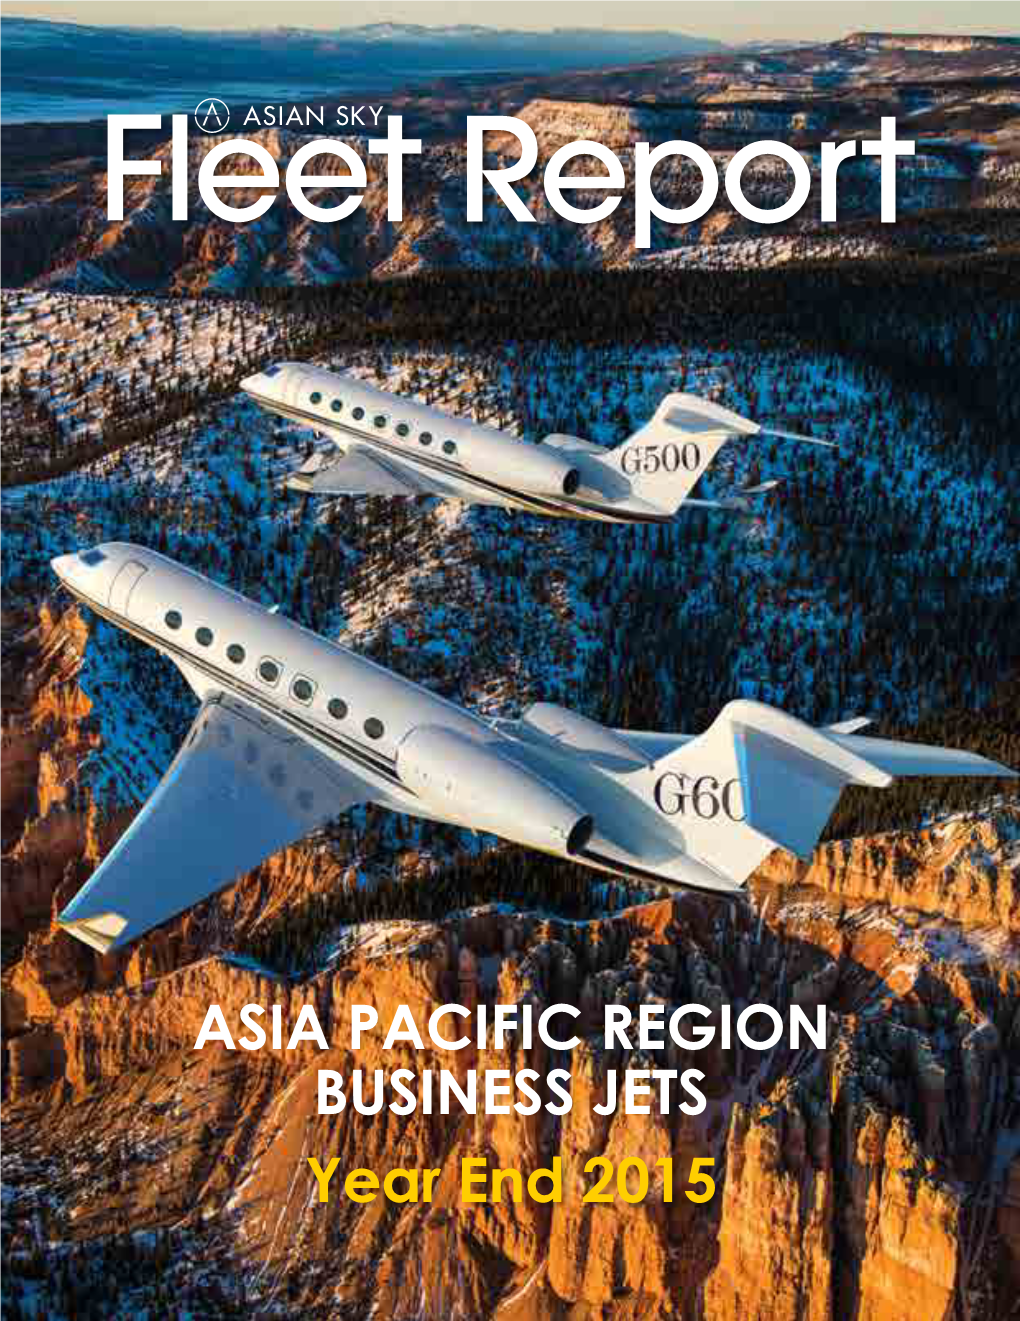 ASIA PACIFIC REGION BUSINESS JETS Year End 2015 Beijing Seoul Penglai